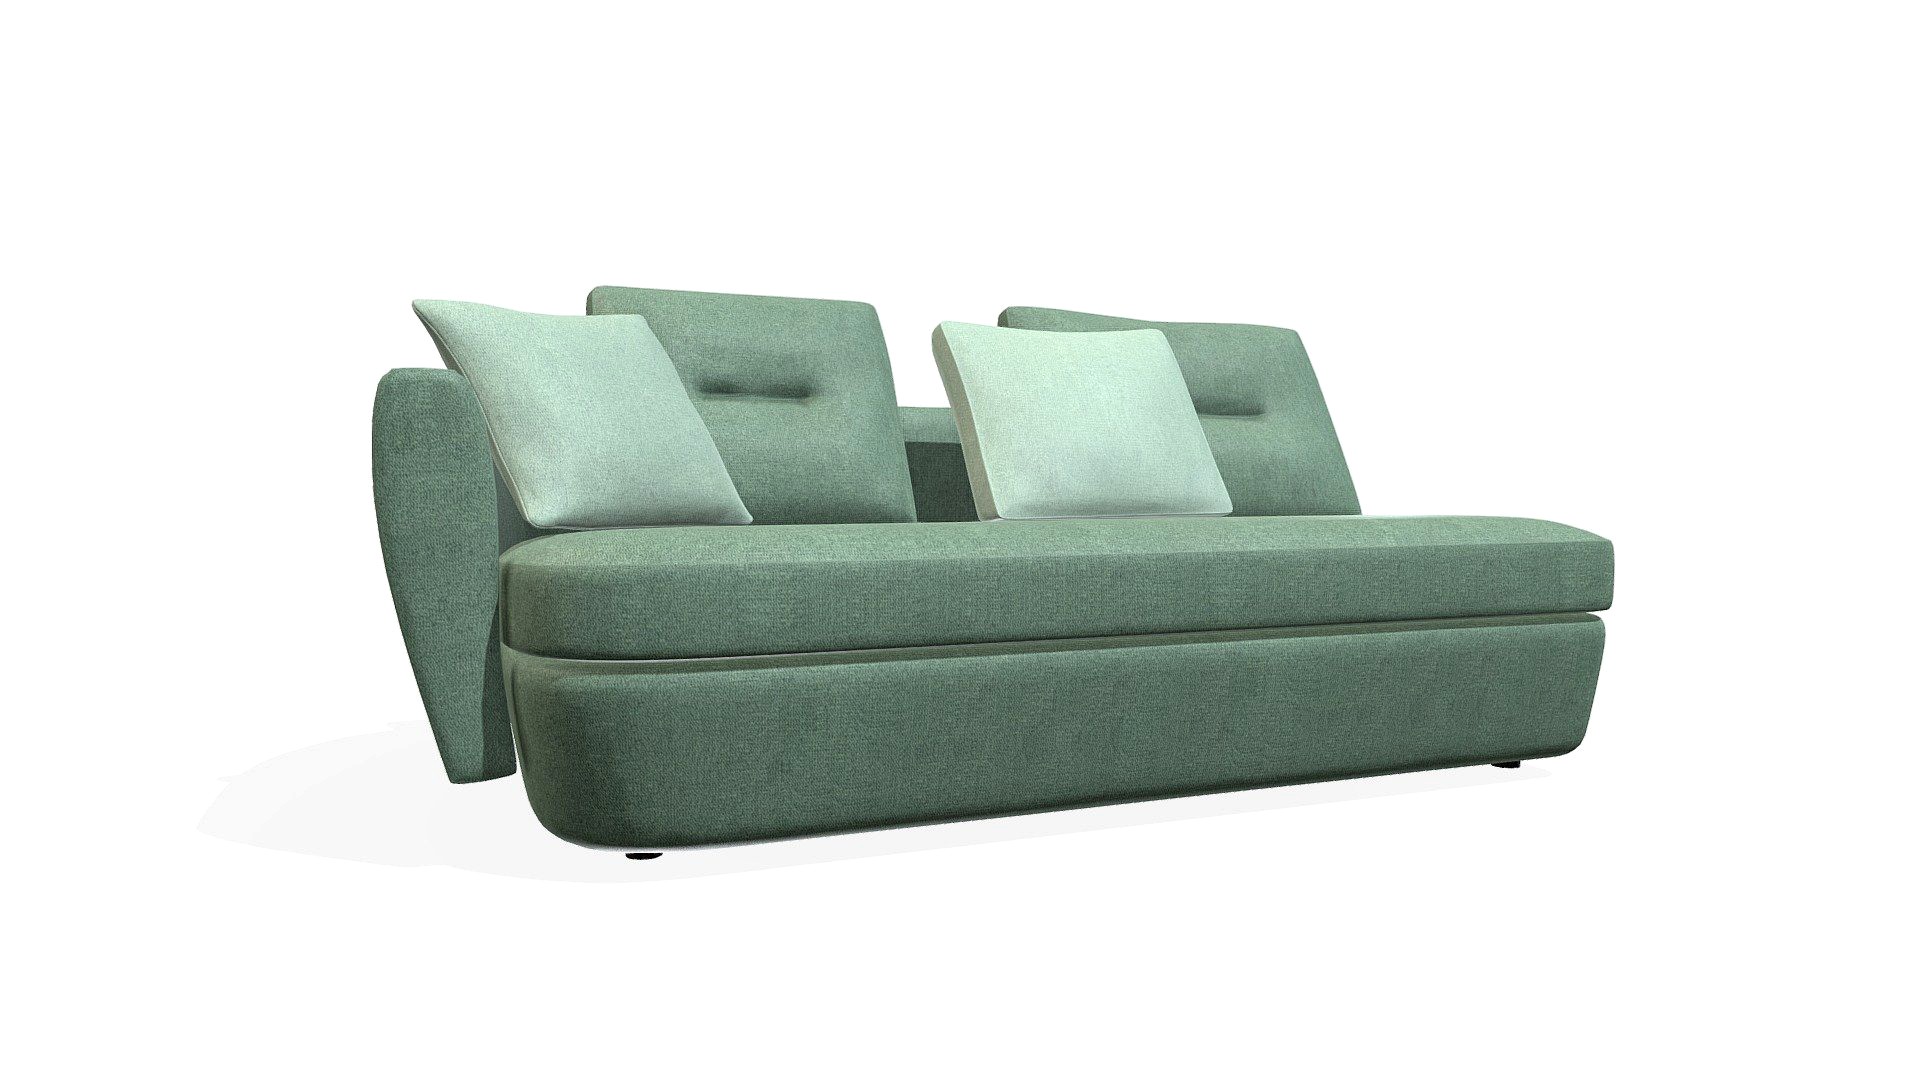 IPANEMA - Armed Settee Right Complete Item